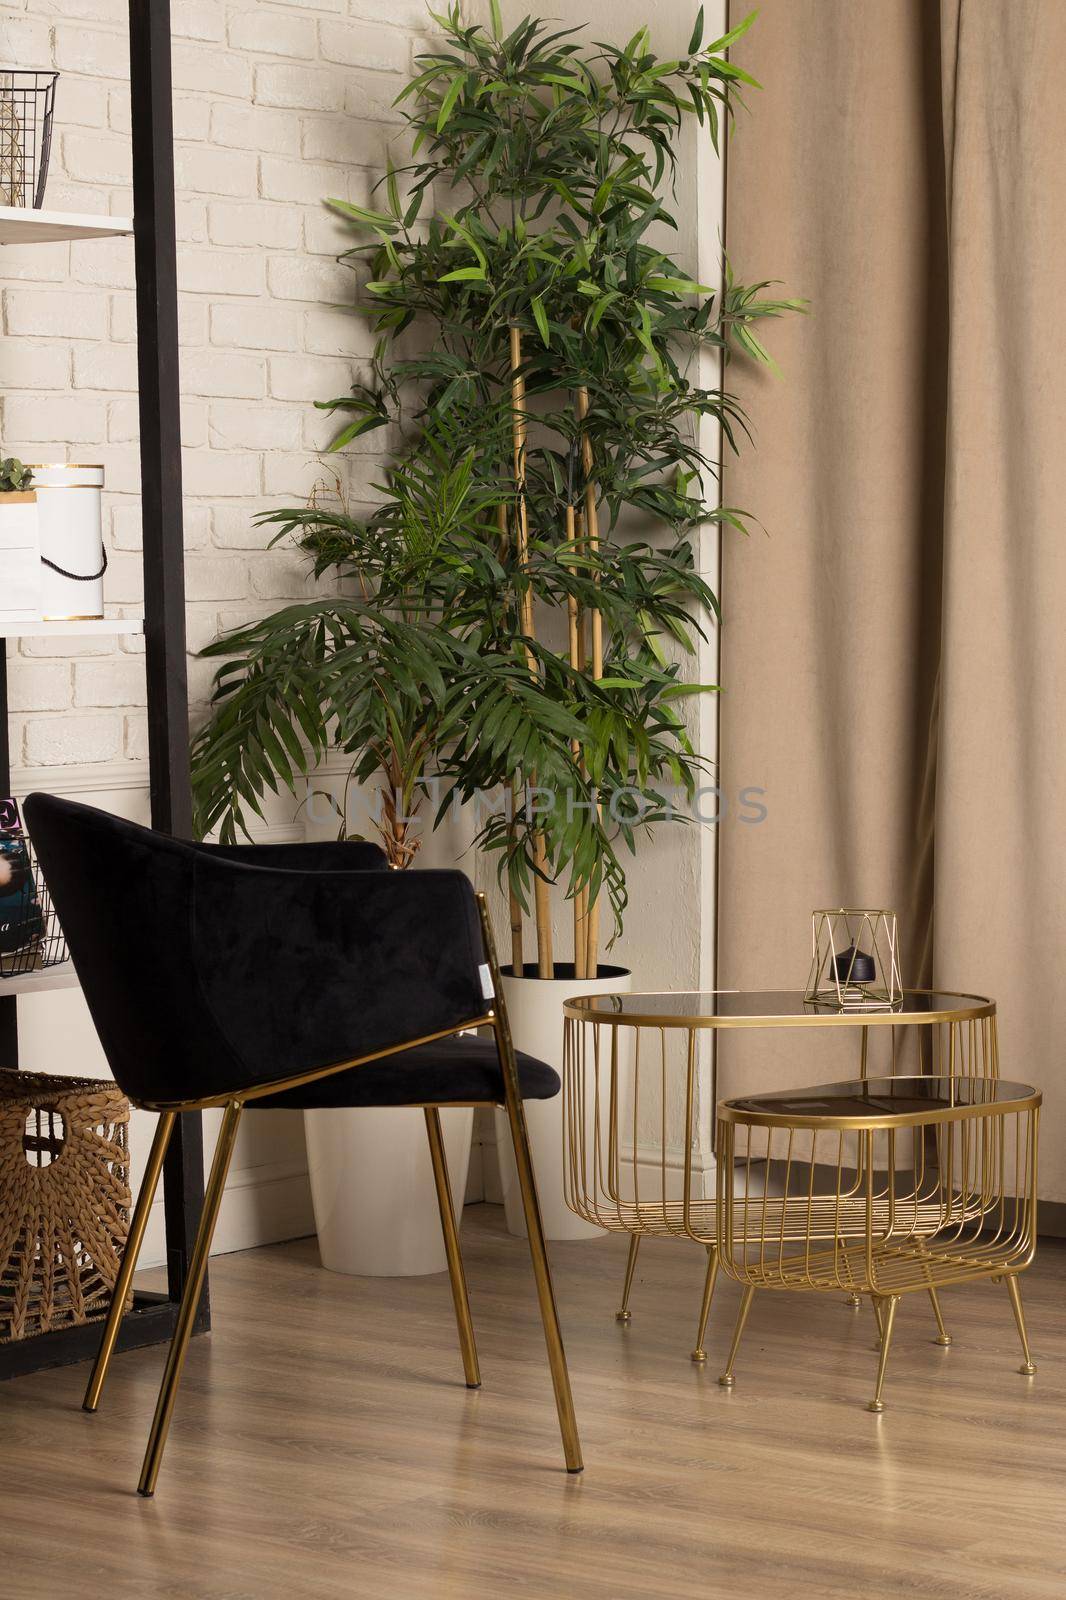 Interior with designer black armchair, plant, table, wall and shelf with accessories in modern home decor. by lara29